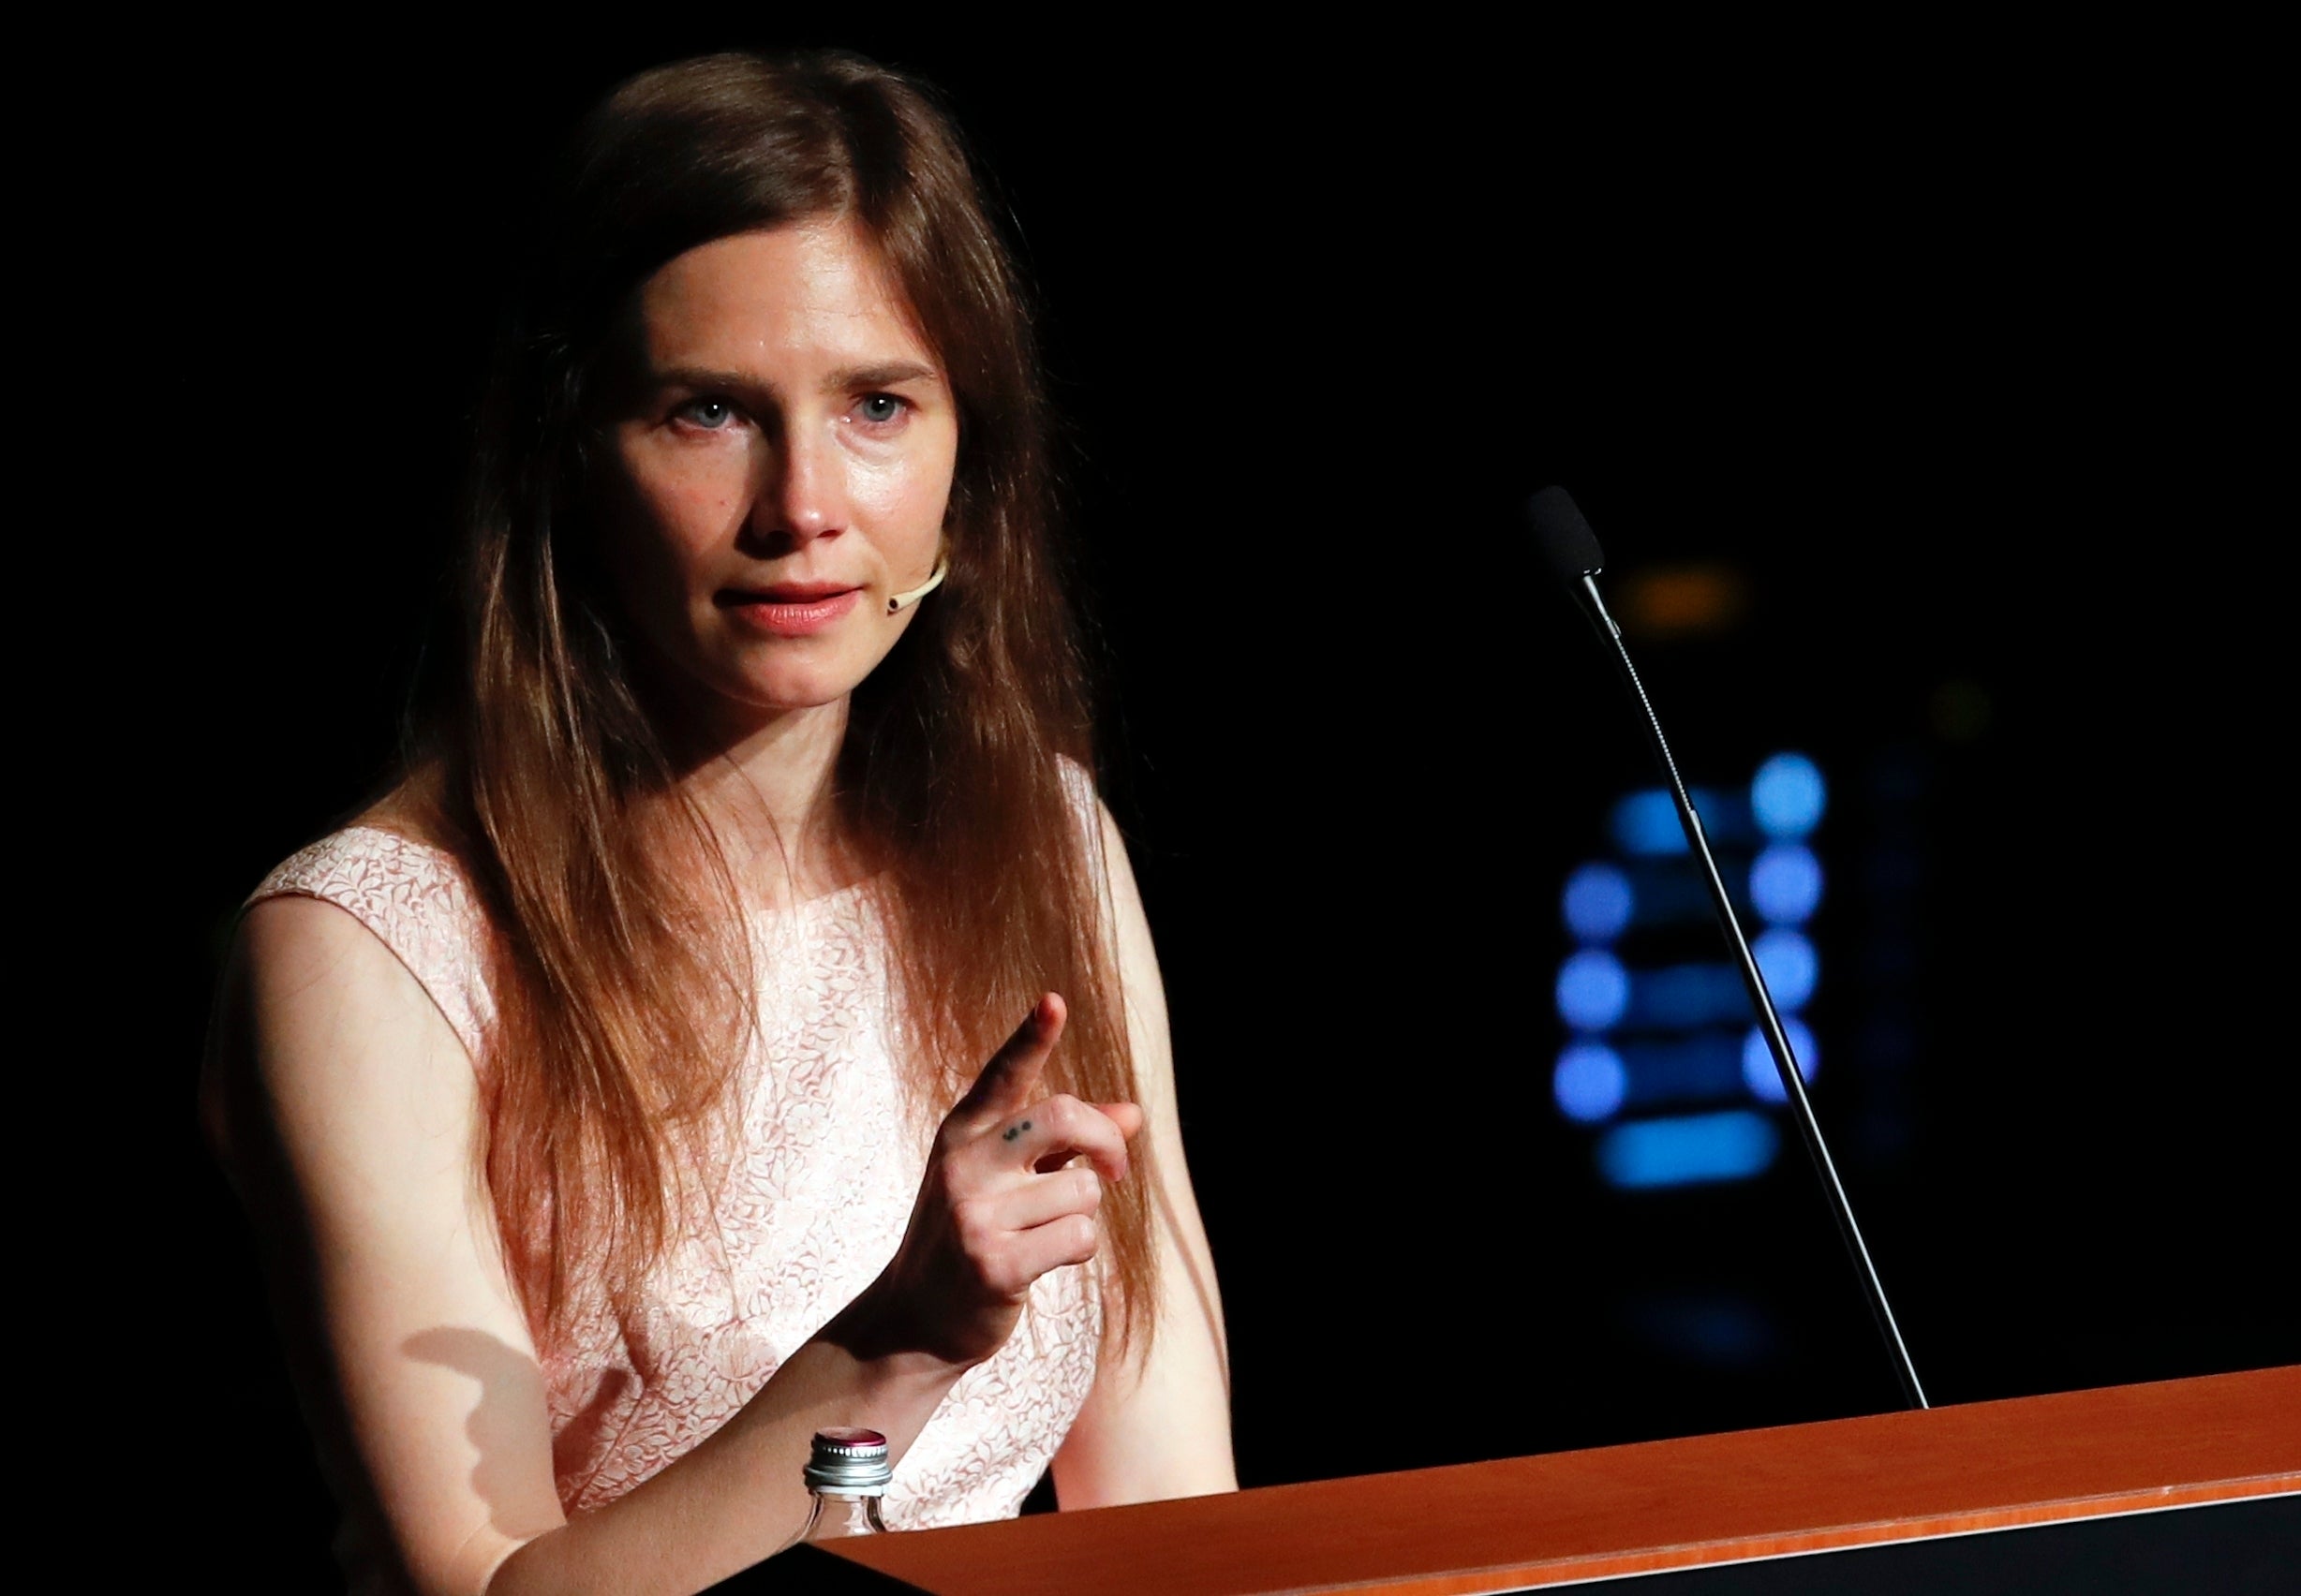 amanda knox faces another new trial in italy